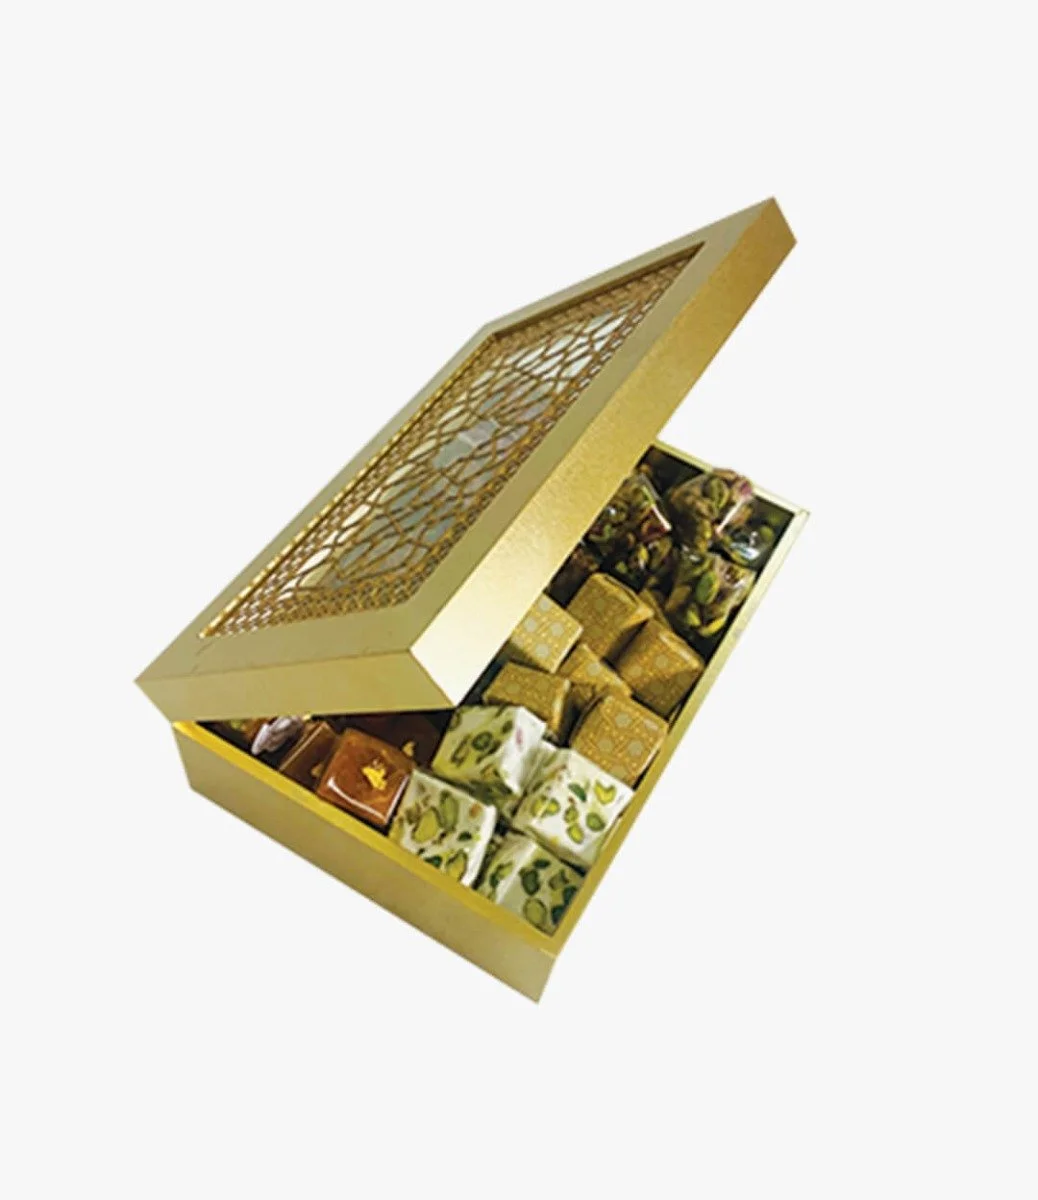 Golden Delight - Chocolate and Sweets Box